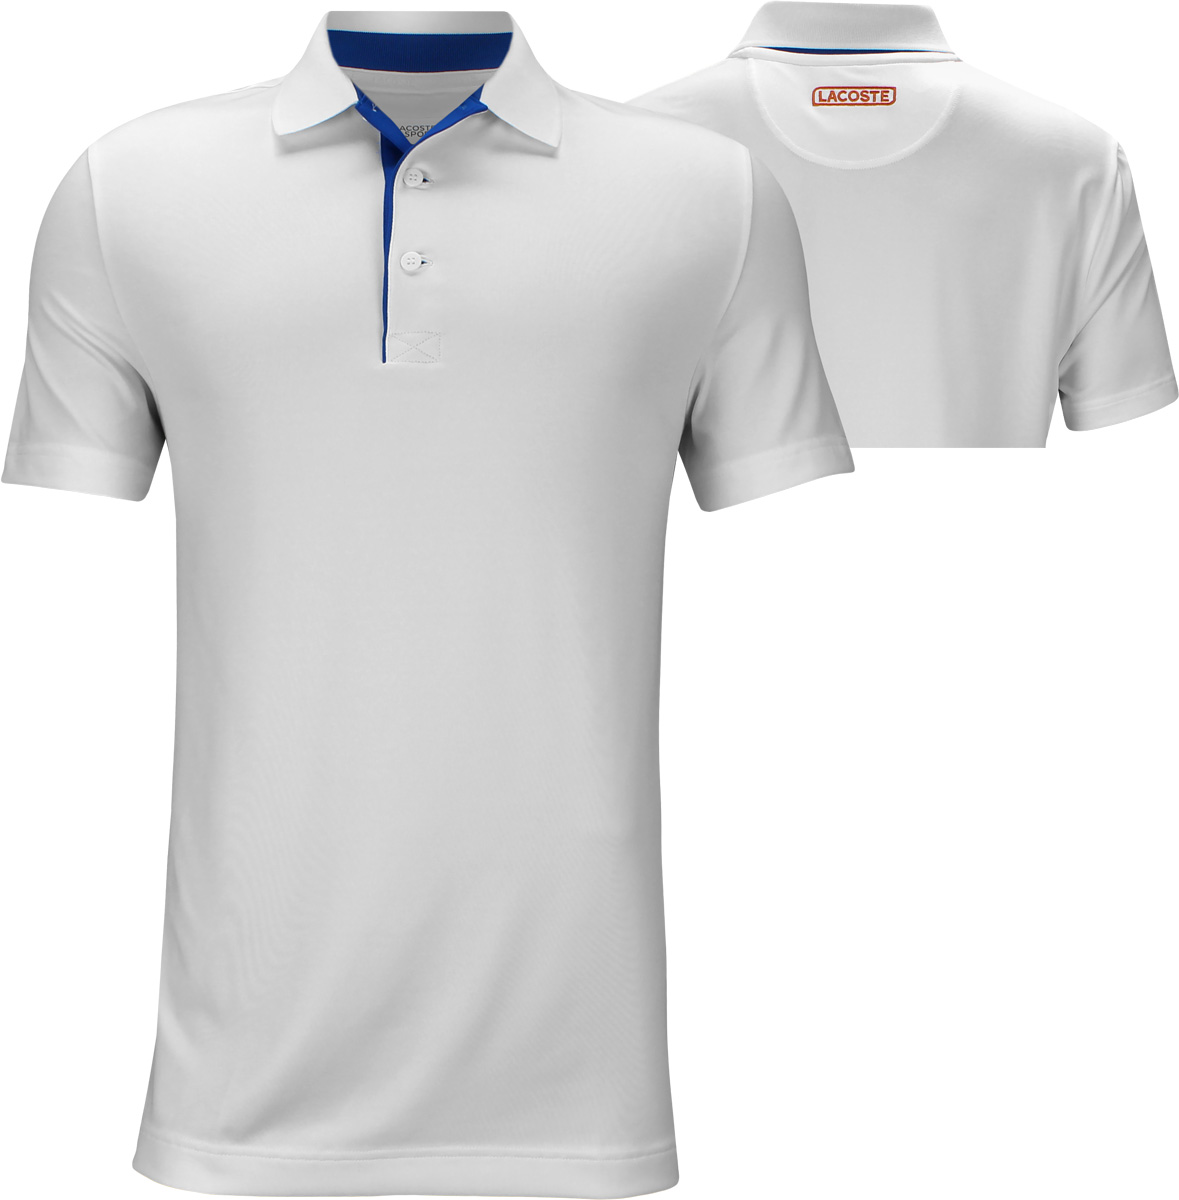 lacoste golf clothing